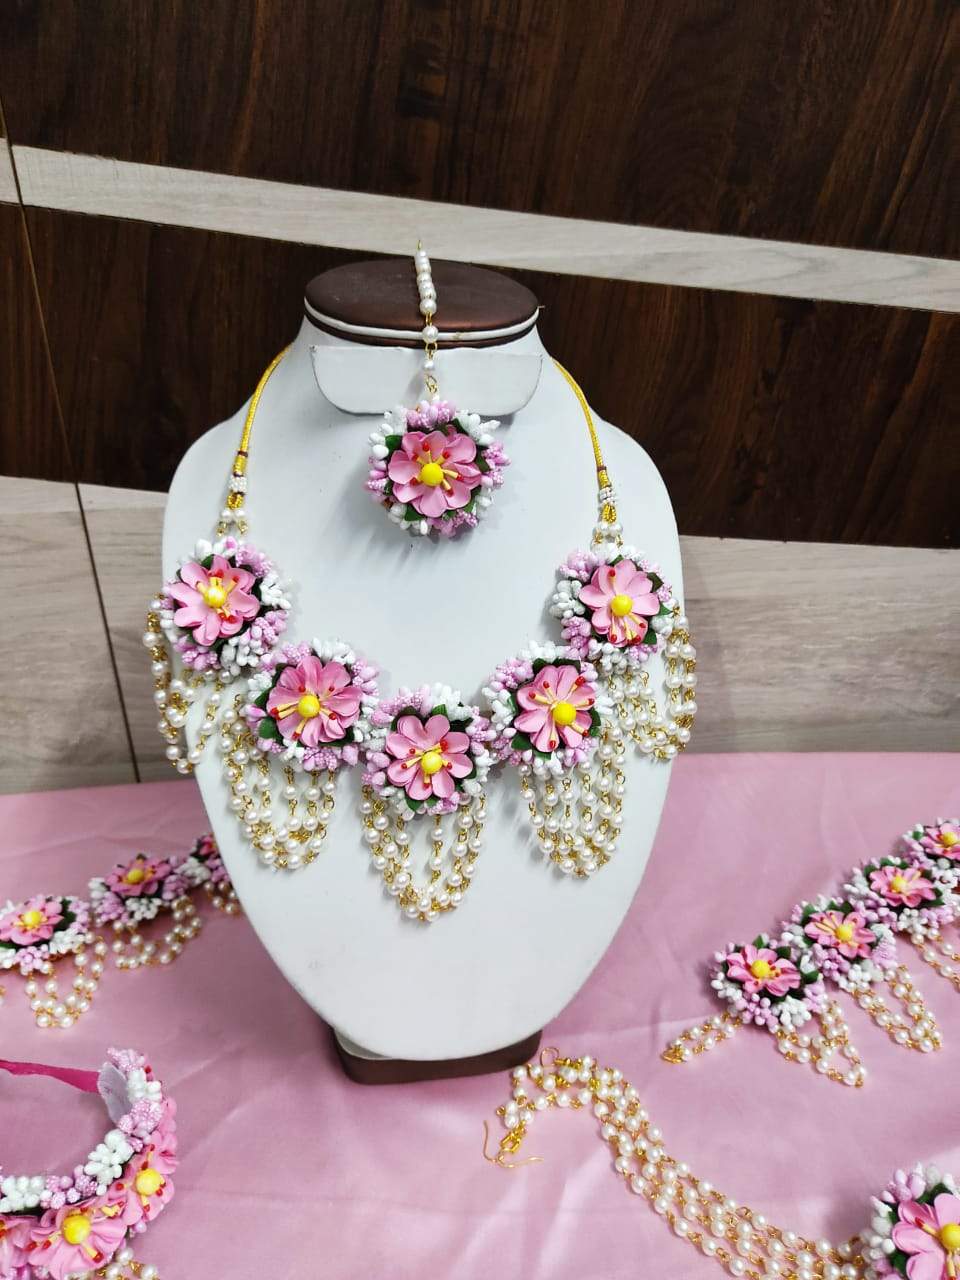 Lamansh Flower Jewellery 1 Necklace, 2 Earrings with extended clips , 1 Maangtika , 2 Bracelets attached to ring & 2 Anklets / Pink LAMANSH® Bridal Floral 🌺 Jewellery Set for Haldi Ceremony / Special Mehendi set